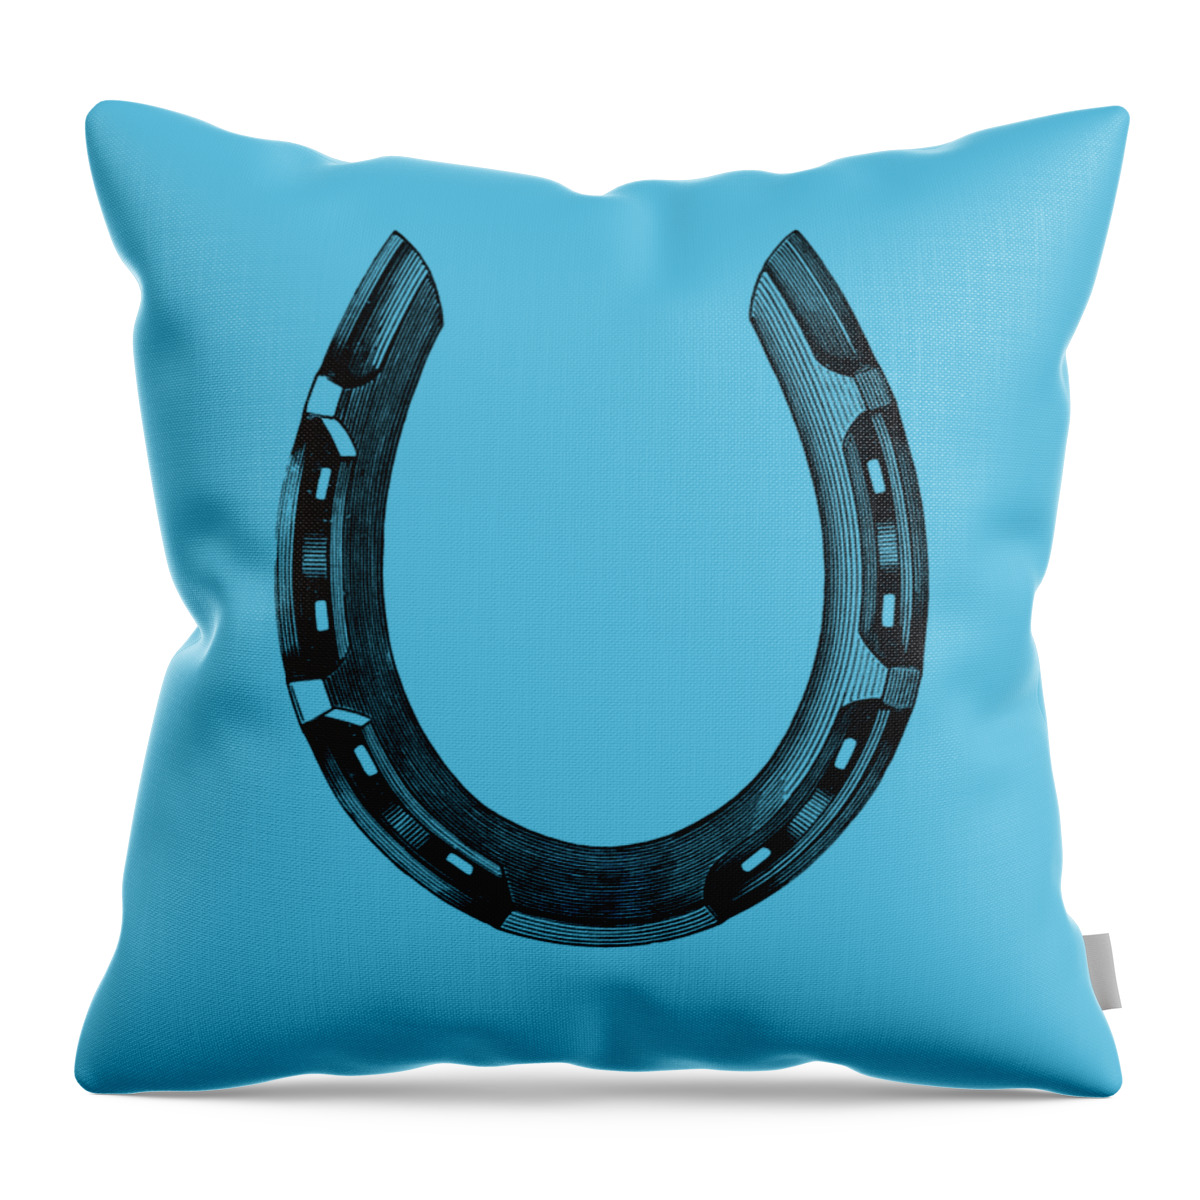 Horseshoe Throw Pillow featuring the digital art Horseshoe in black and white by Madame Memento